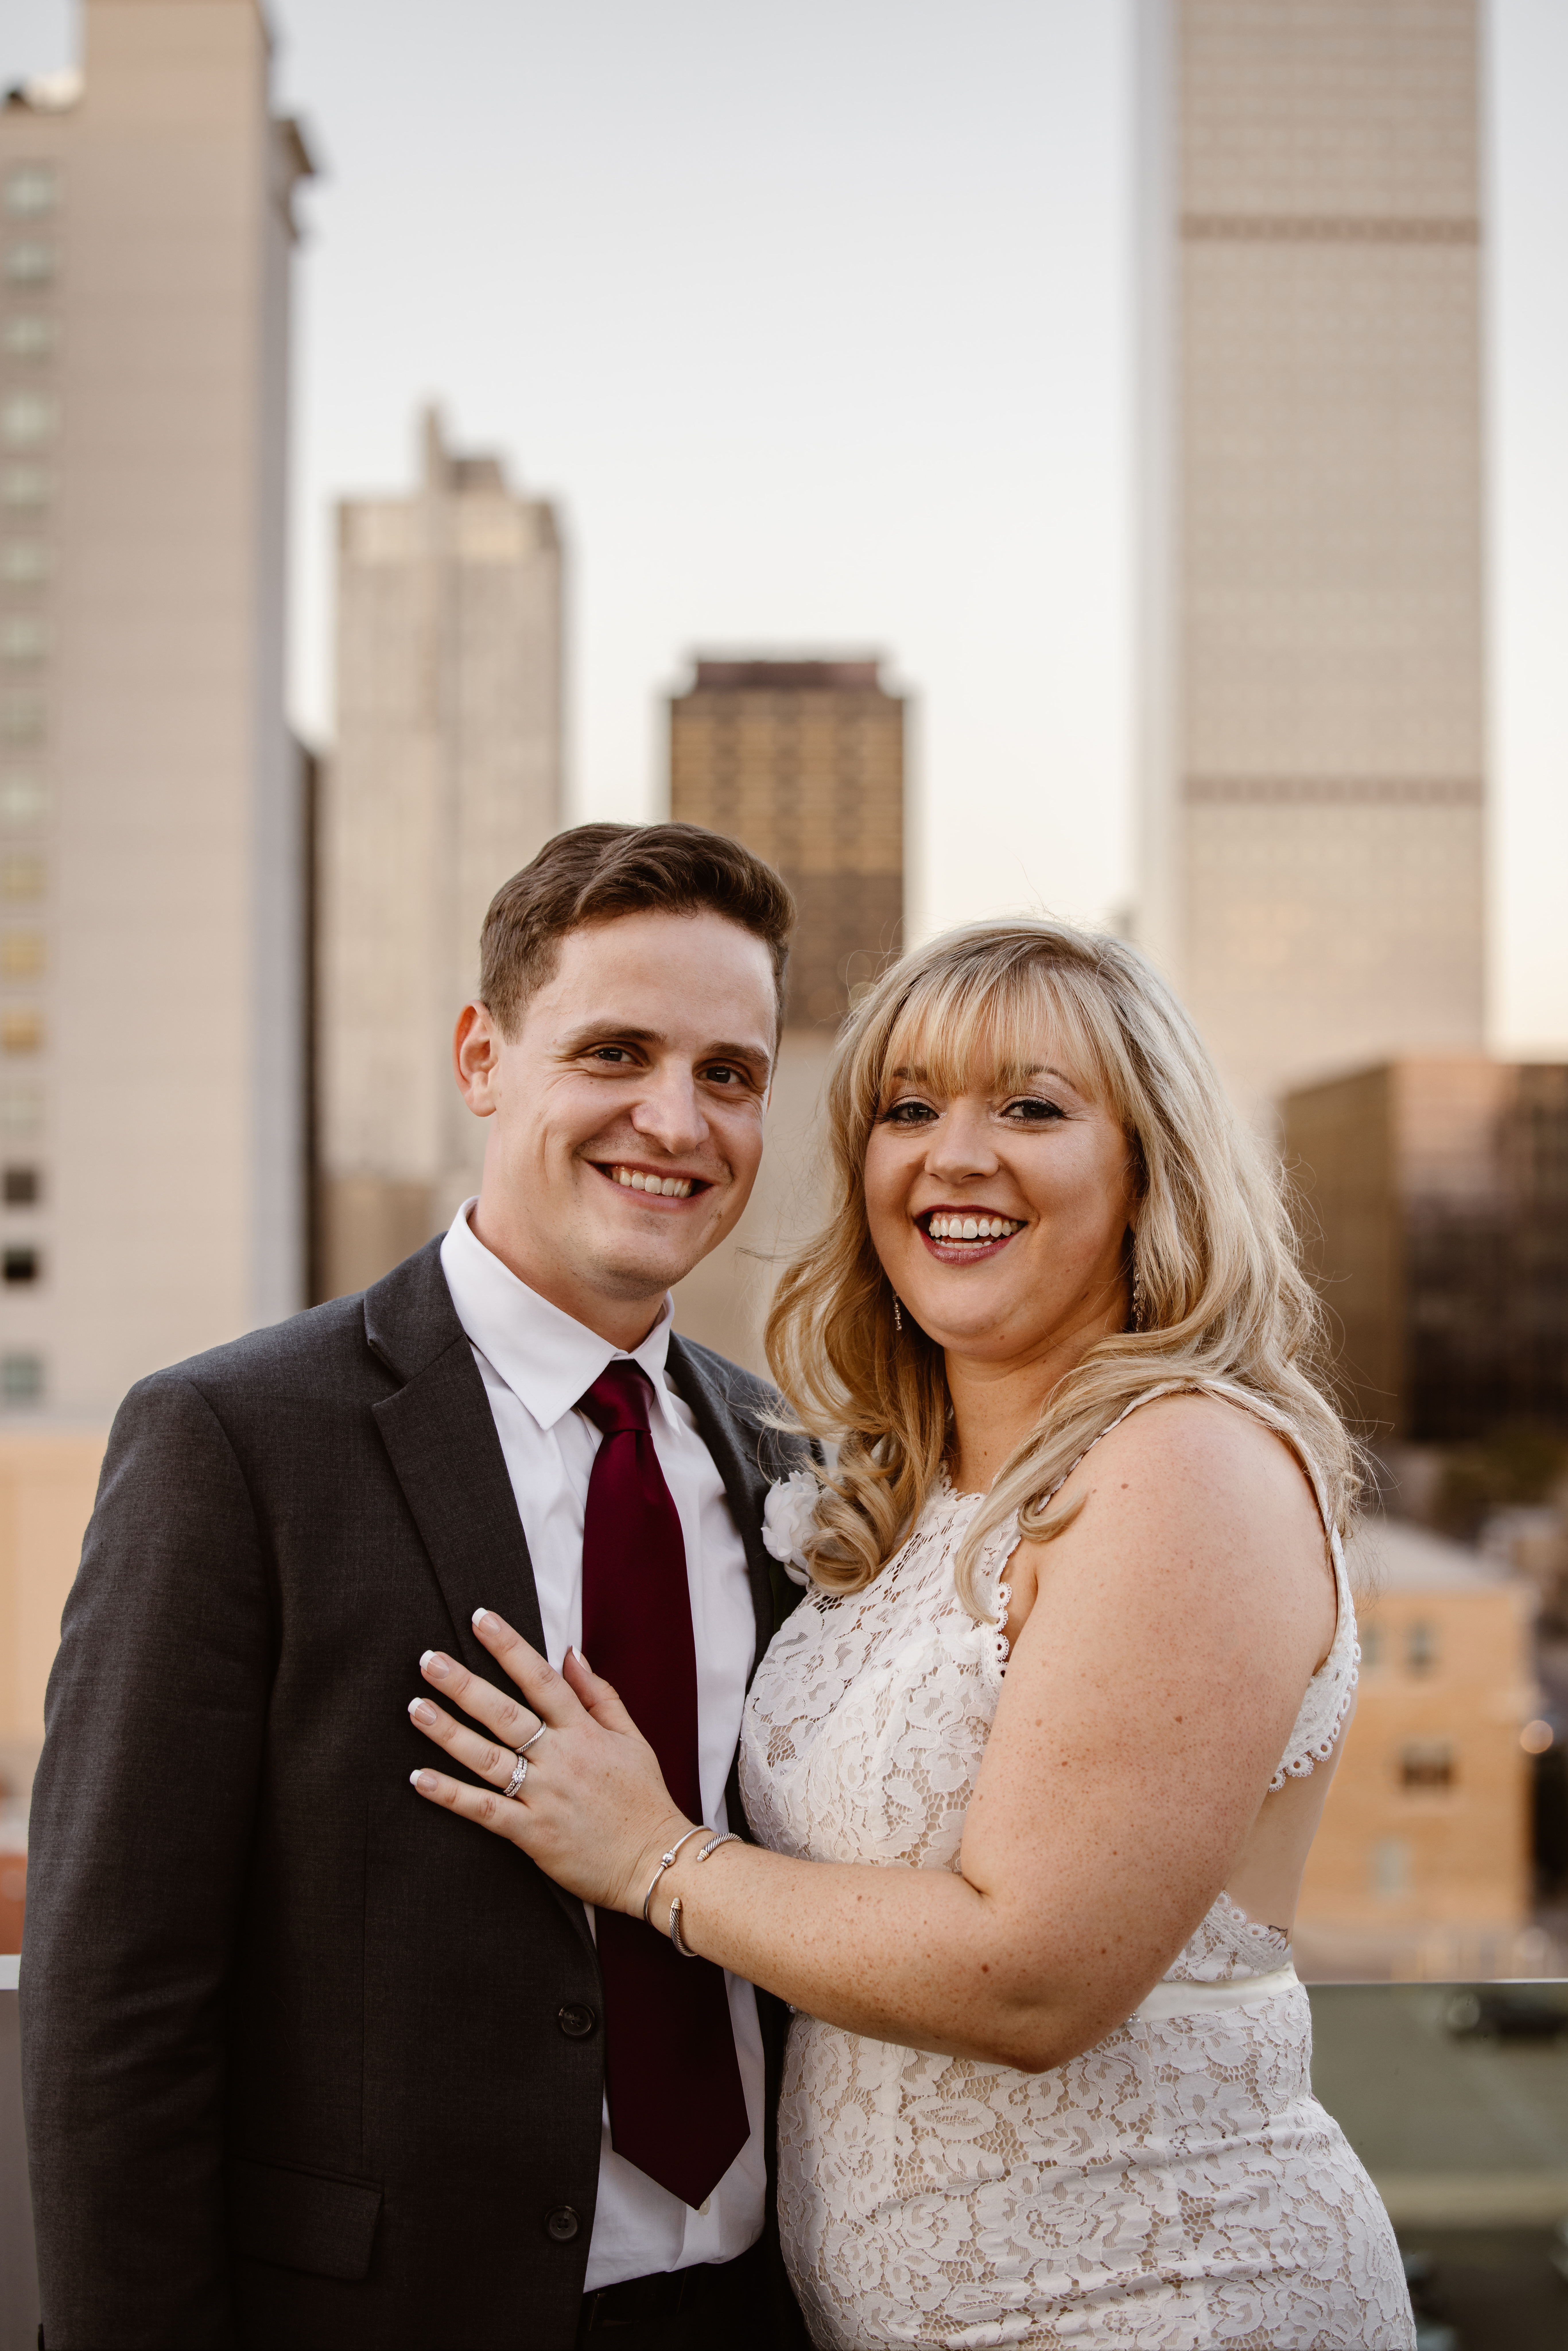 Portrait of groom and bride on a rooftop with the city behind them